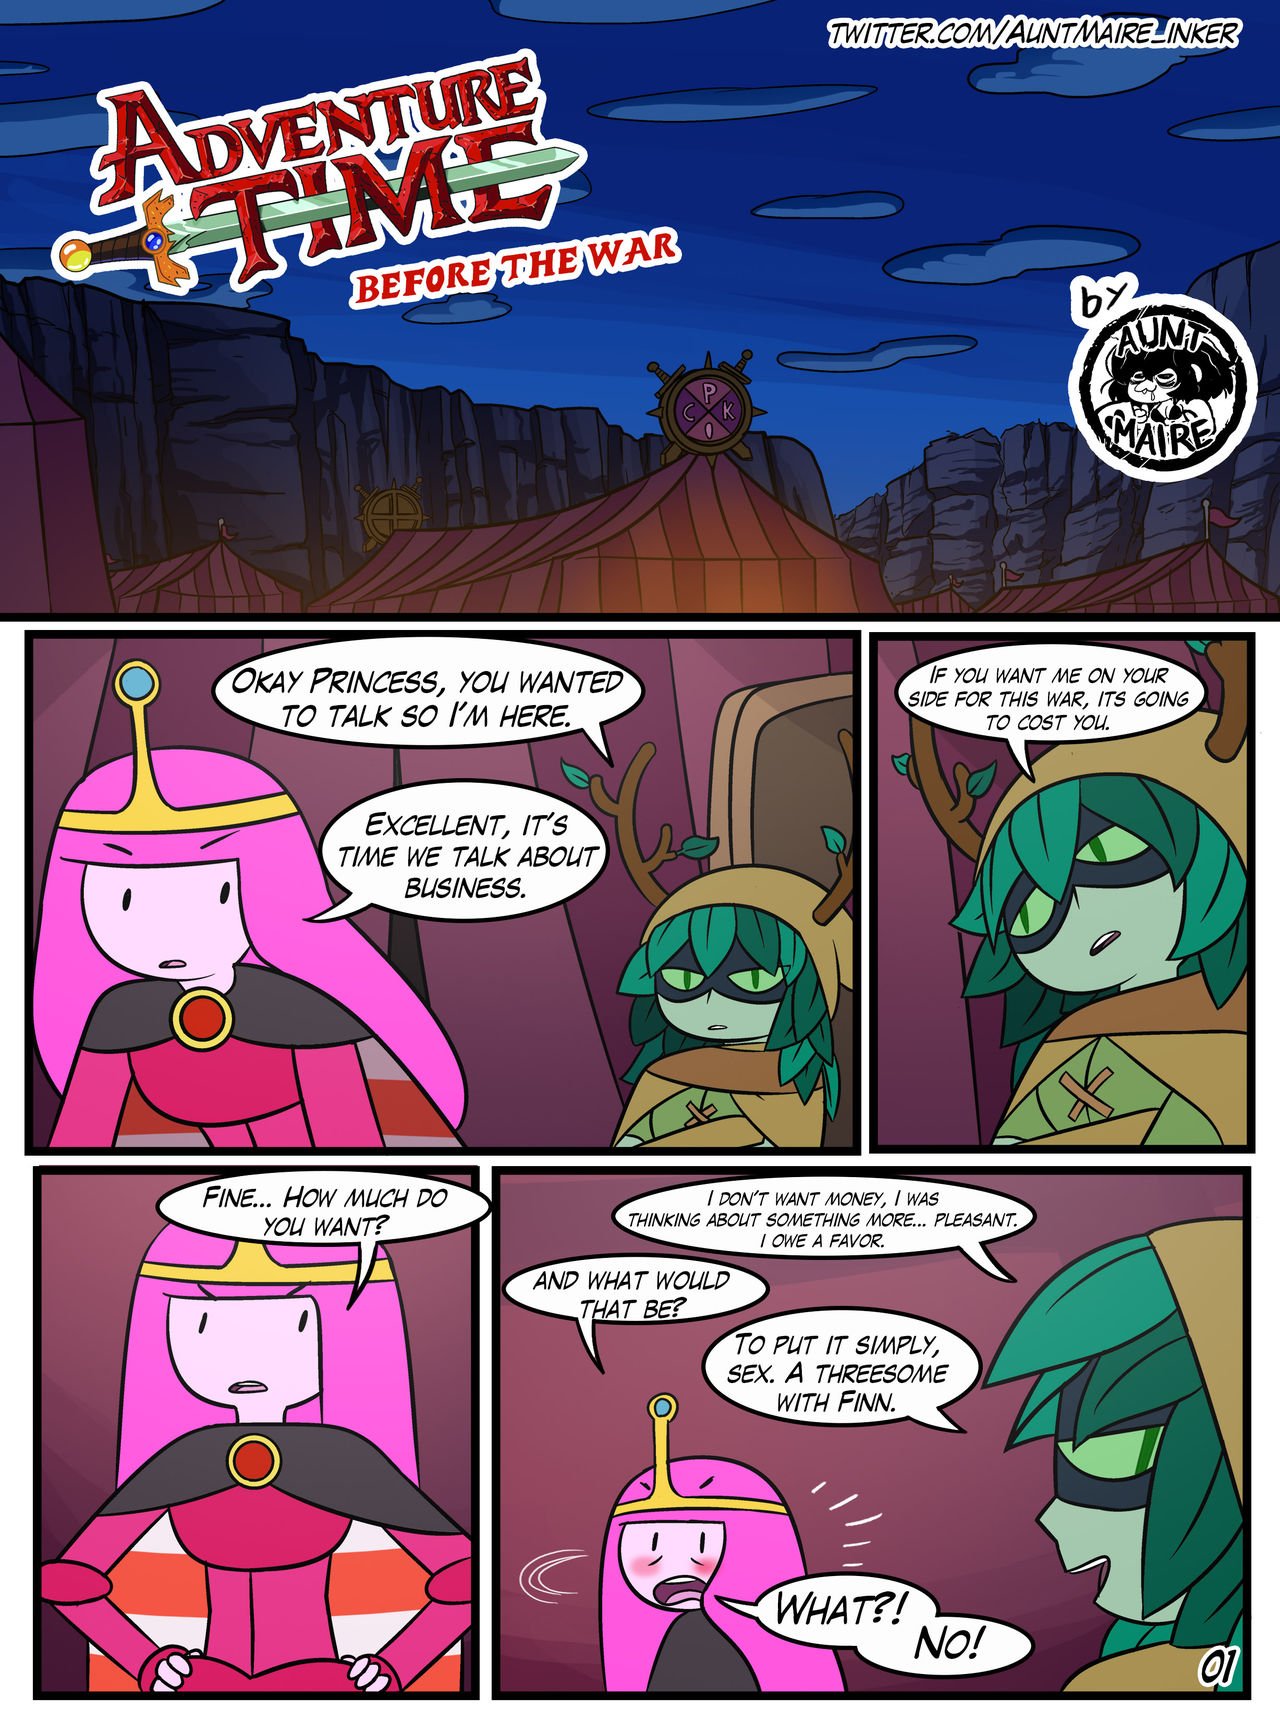 Finn Adventure Time Sex Porn - Adventure Time: Before the War - By Inkershike porn comic